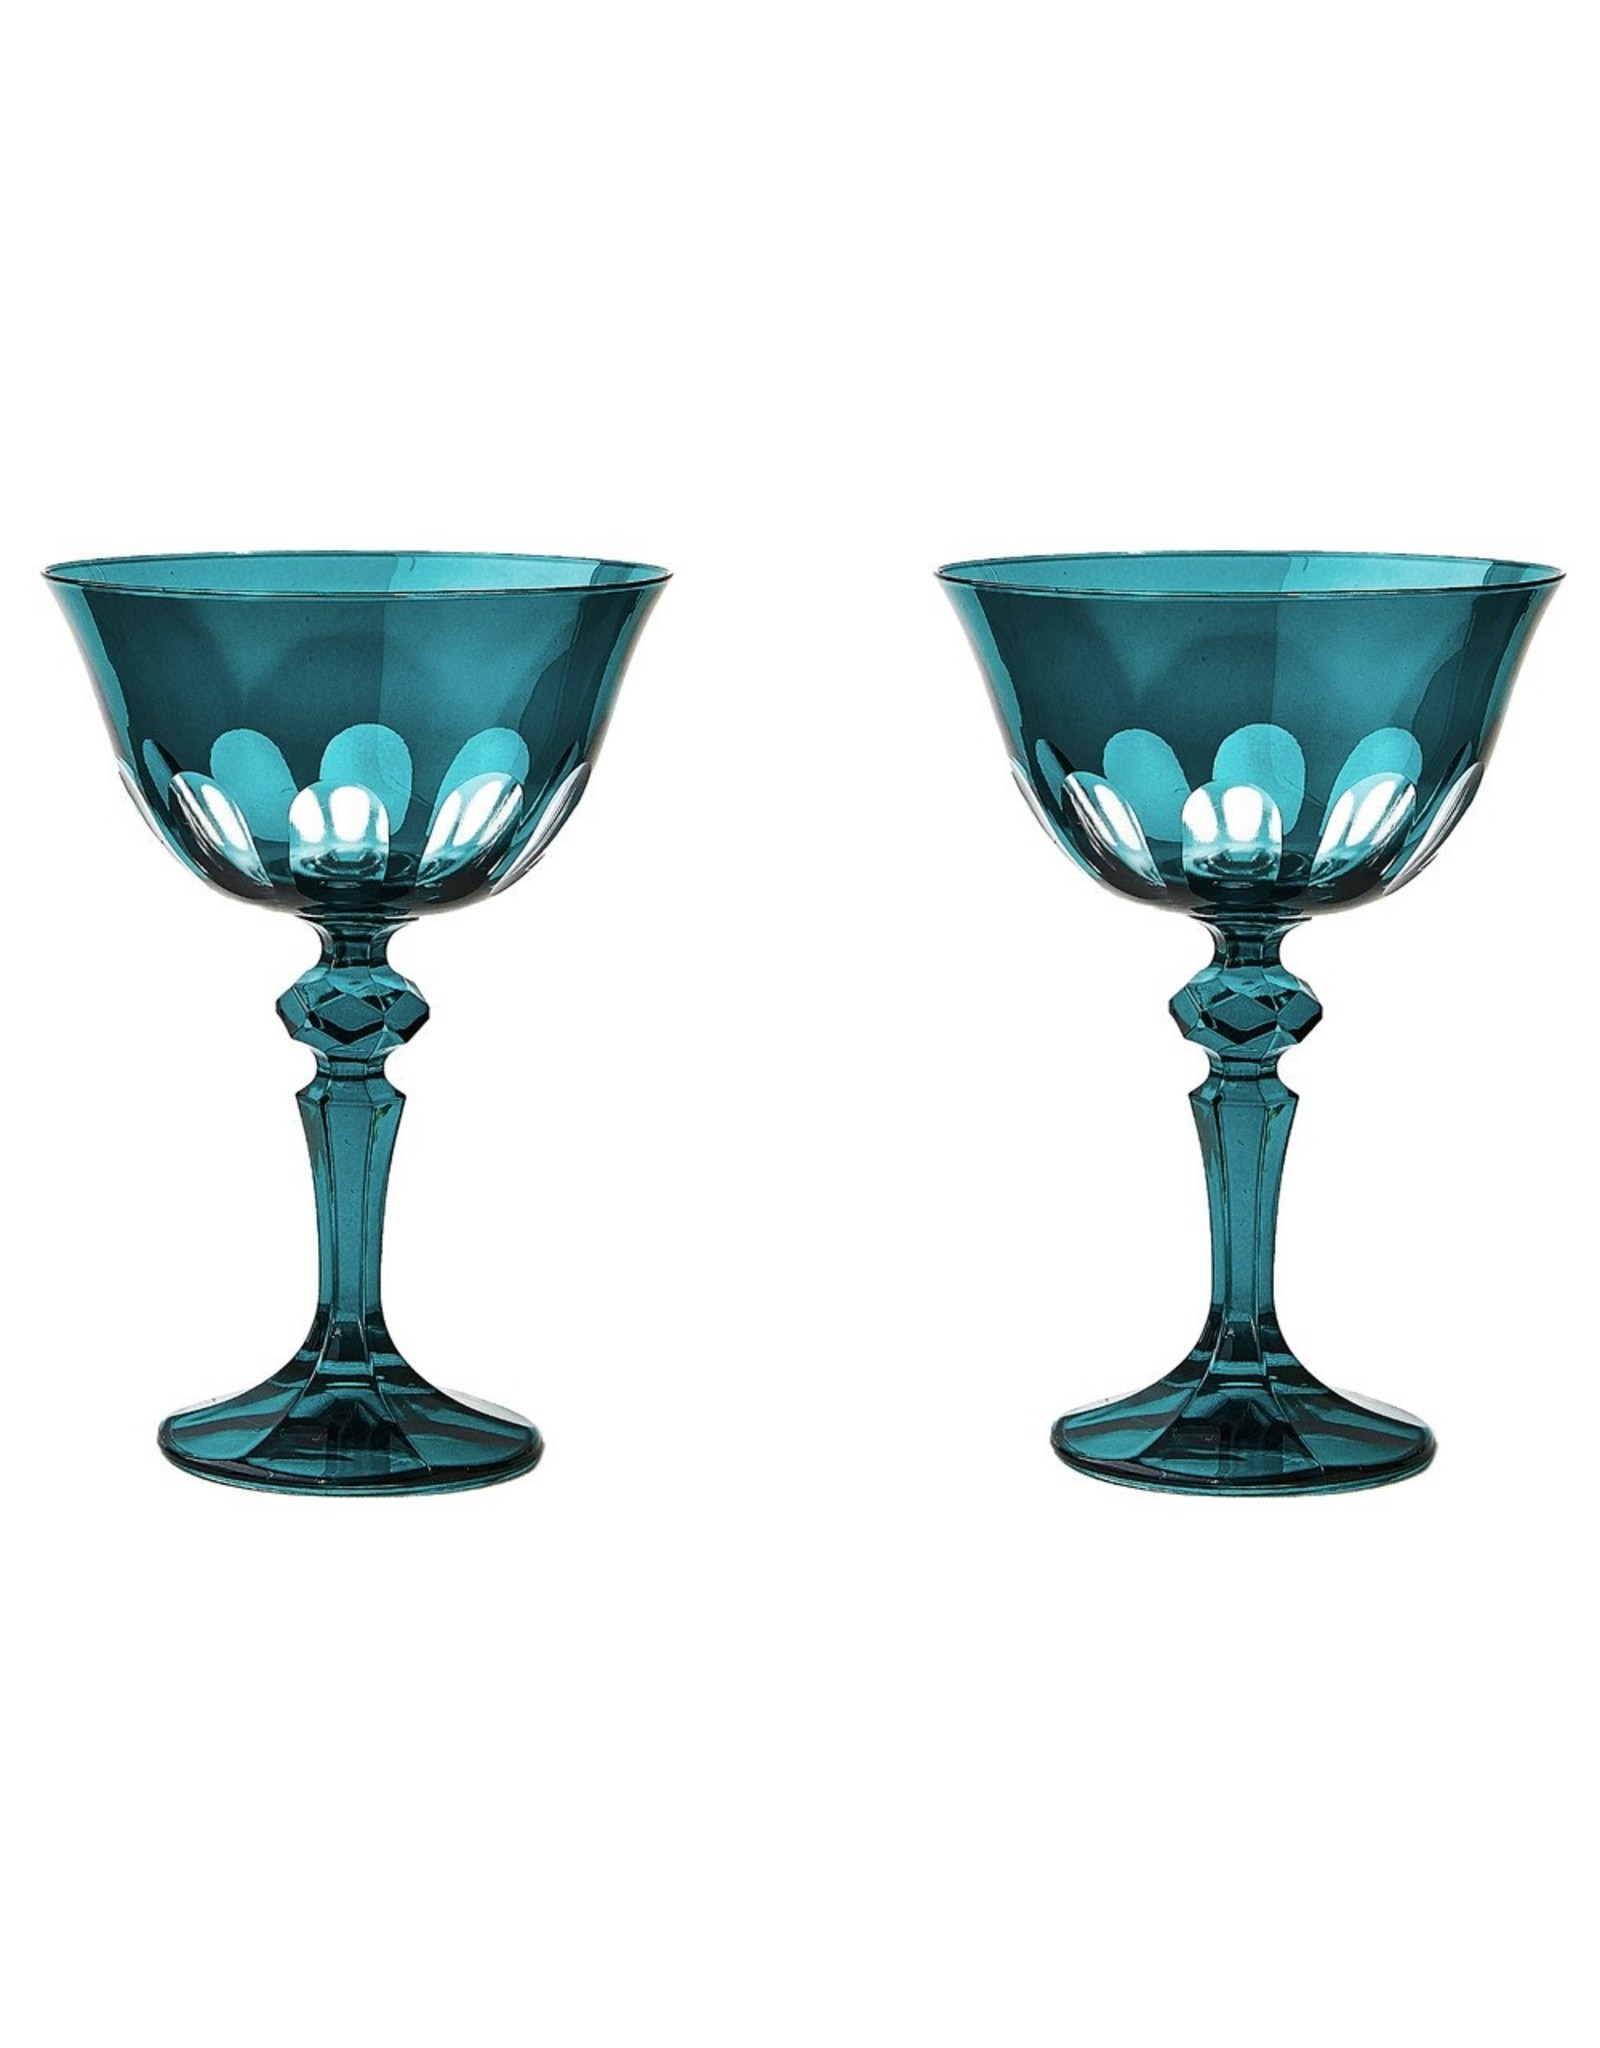 Sir | Madam Rialto Glass Coupe Set of 2, Millicent